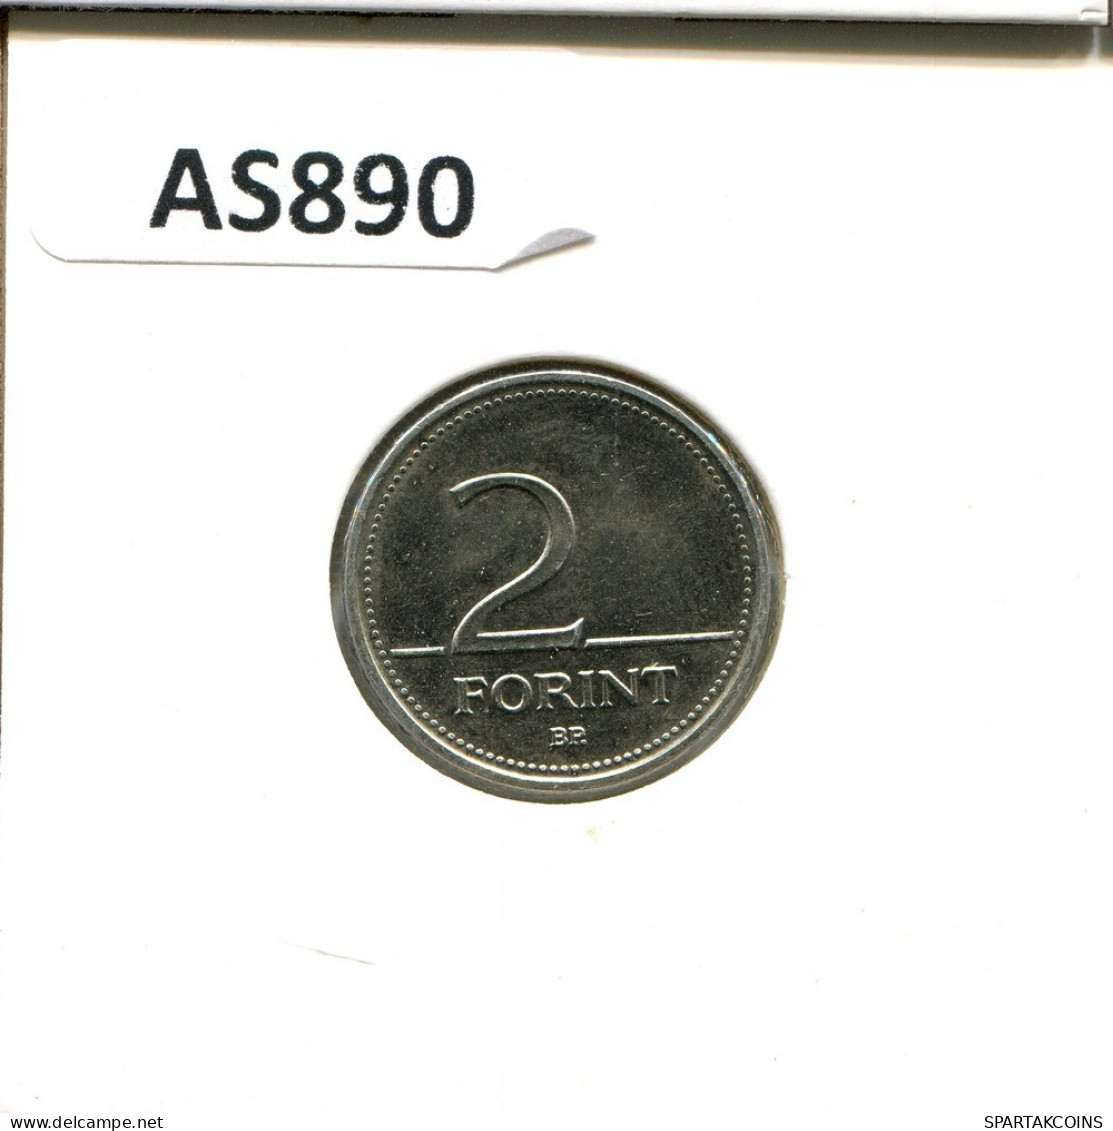 2 FORINT 2003 HUNGARY Coin #AS890.U.A - Ungheria